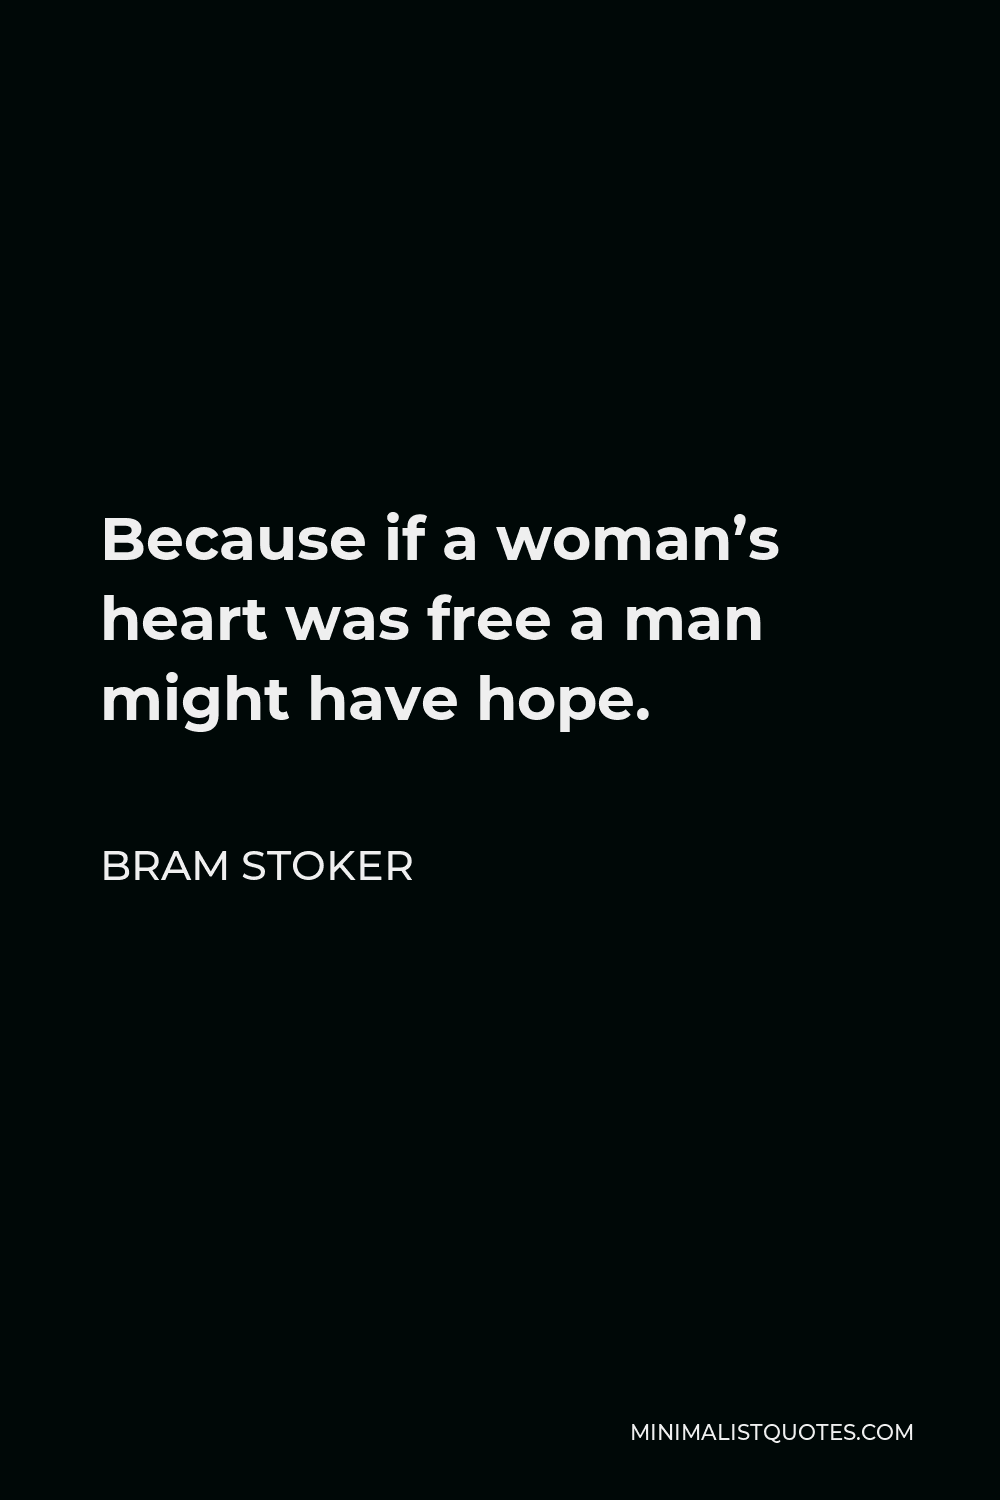 Bram Stoker Quote - Because if a woman’s heart was free a man might have hope.